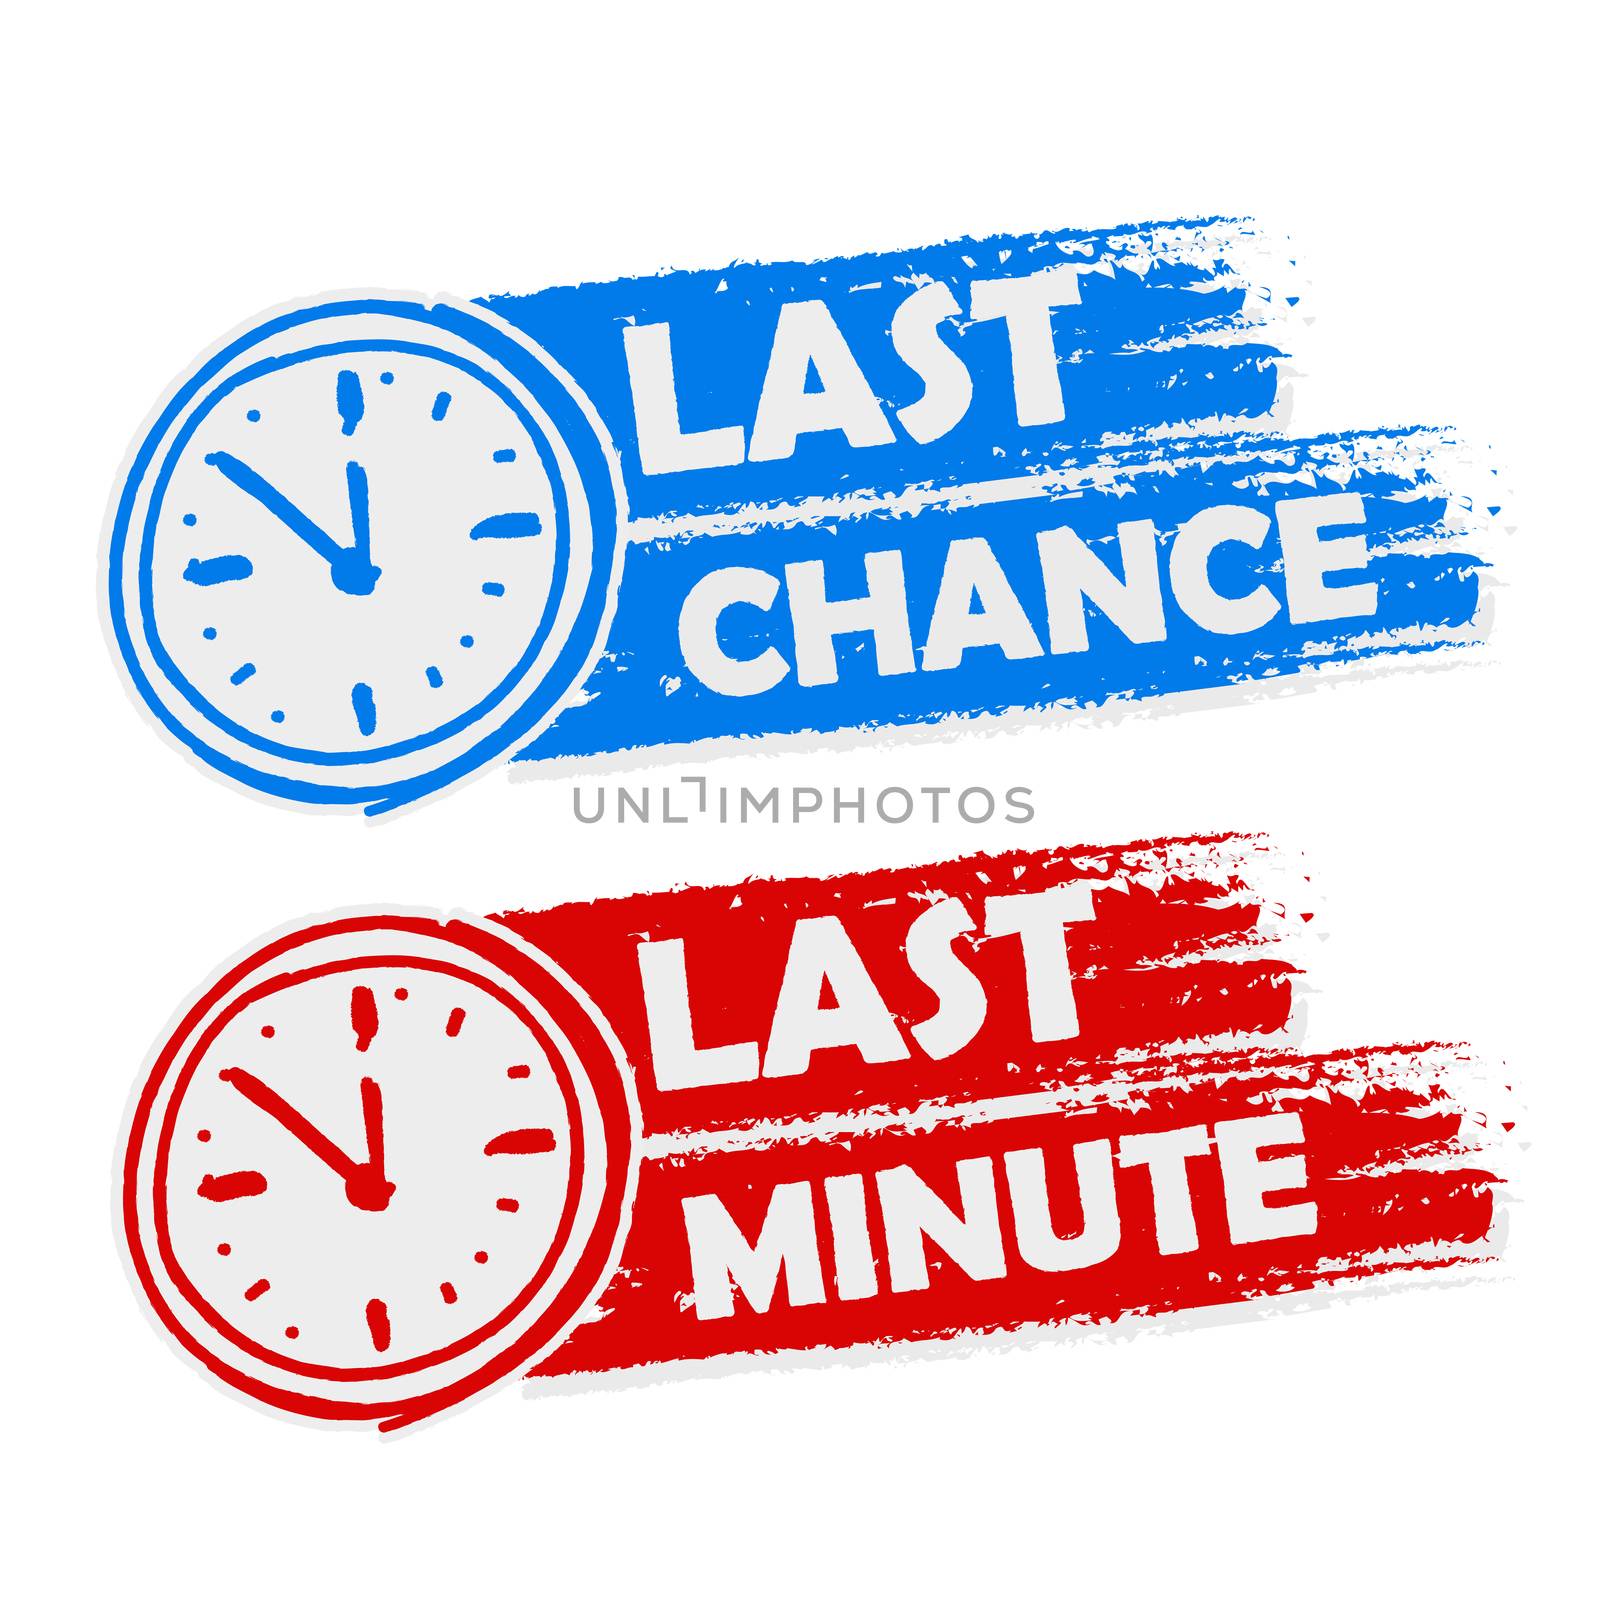 last chance and last minute with clock signs, blue and red drawn by marinini